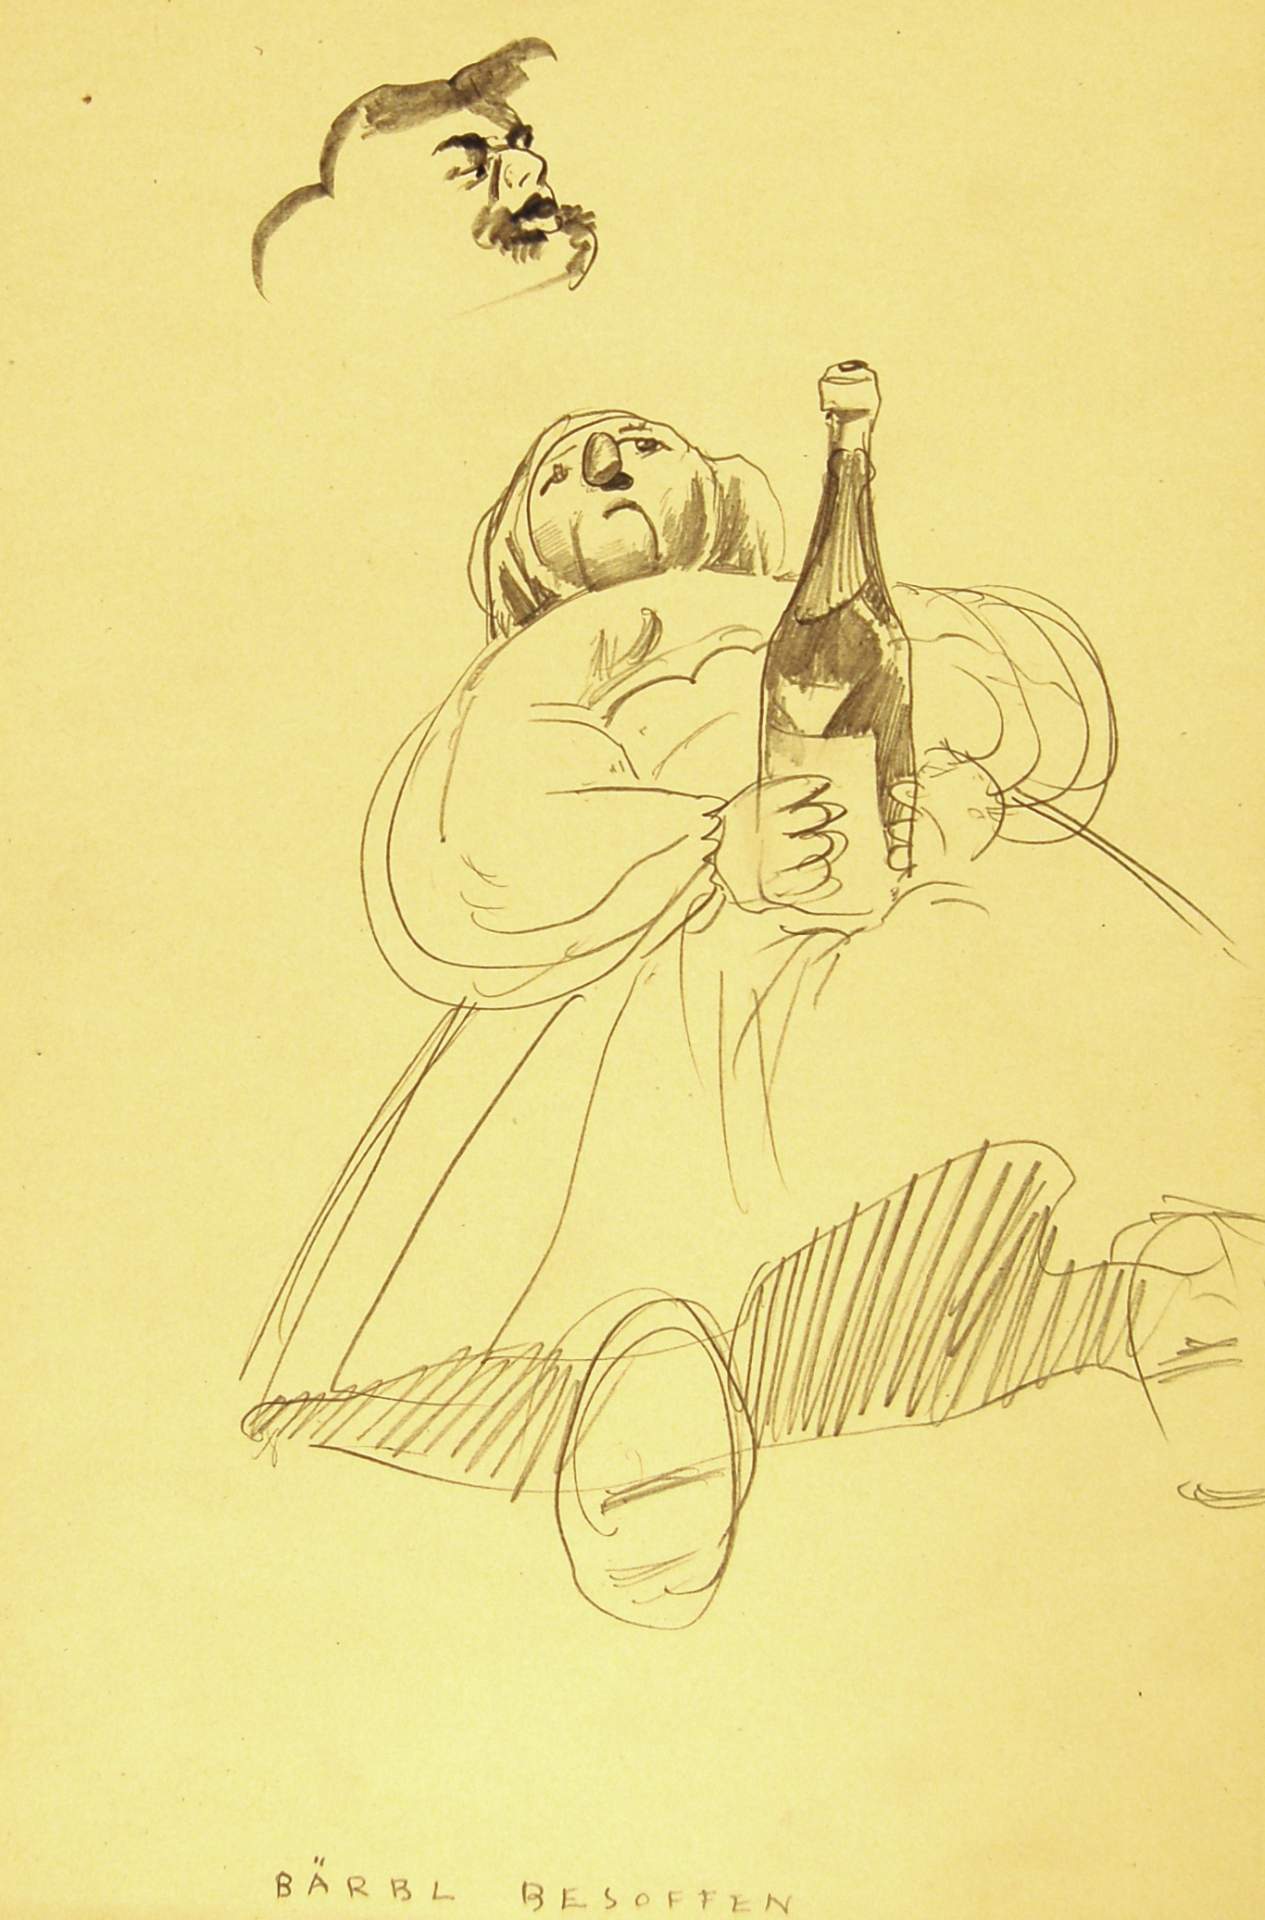 Seated doll Holding Bottle with Sketch of Head